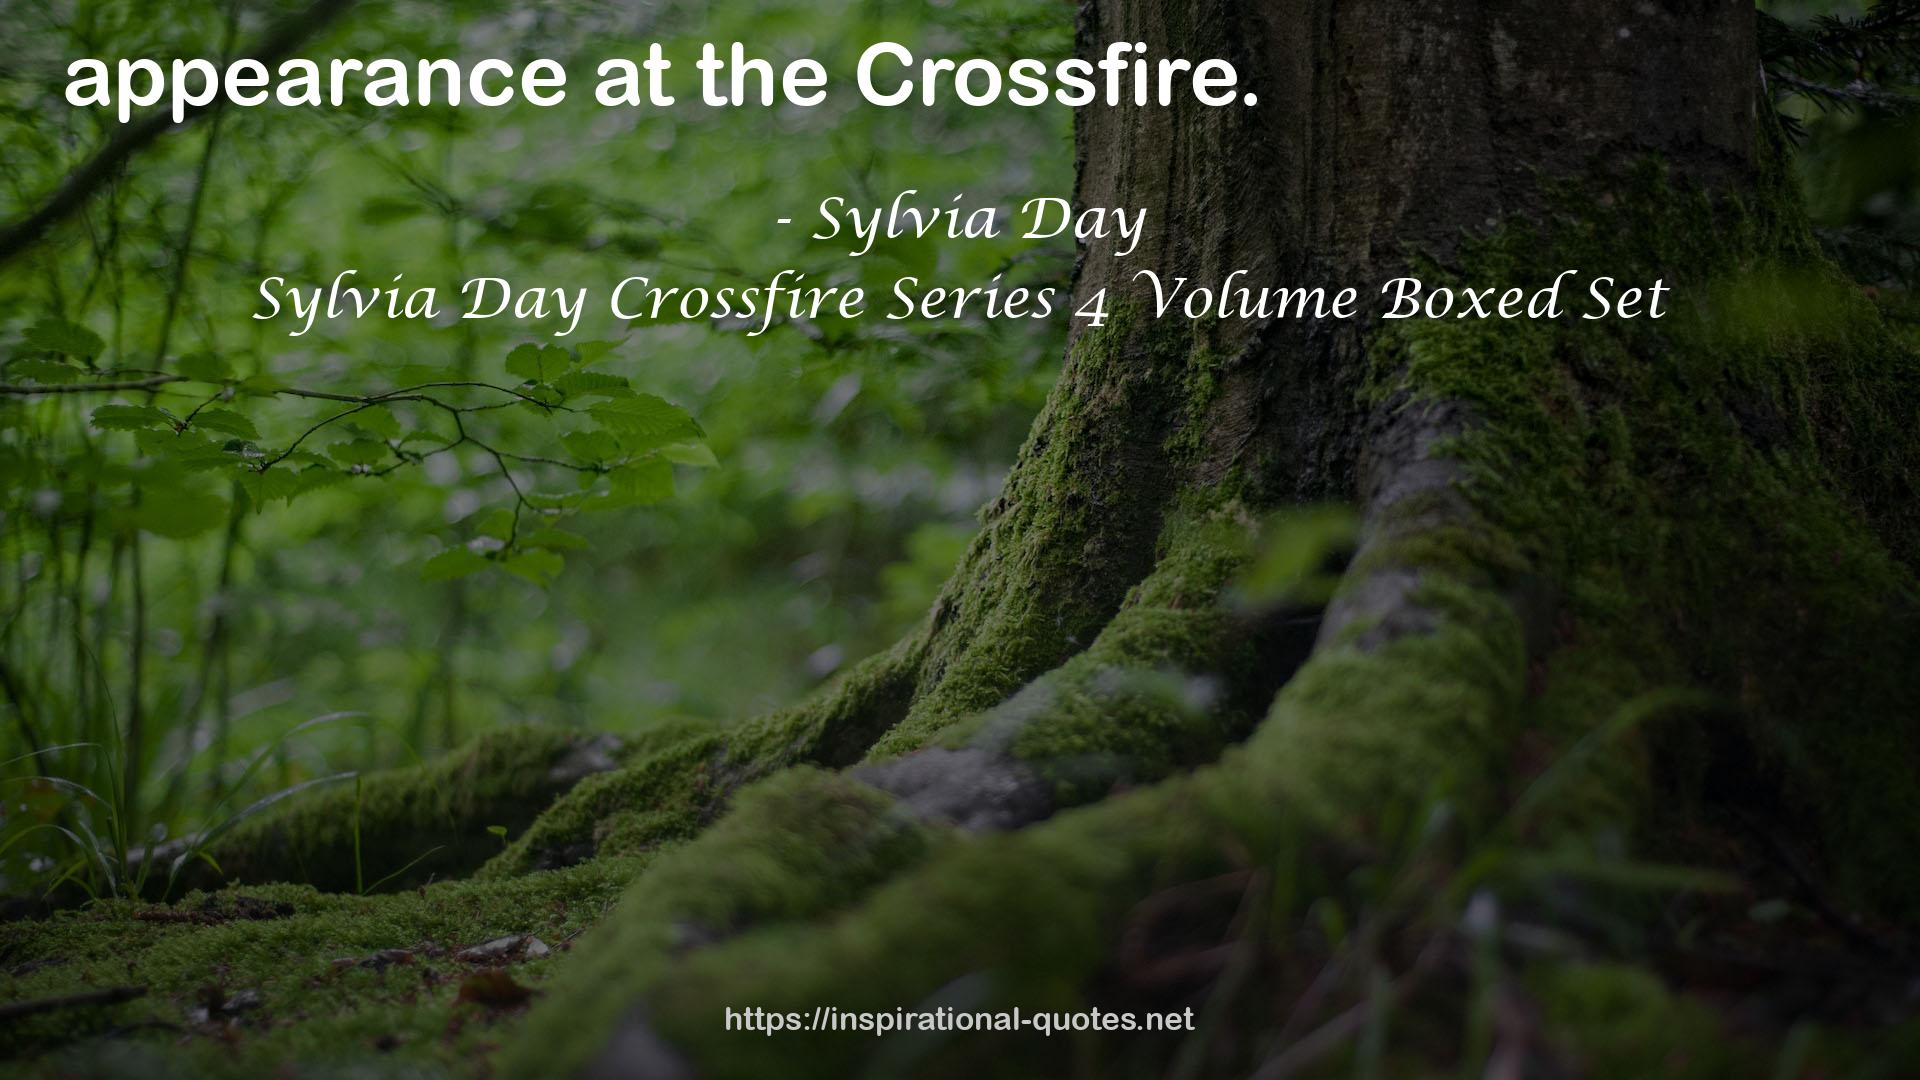 Sylvia Day Crossfire Series 4 Volume Boxed Set QUOTES